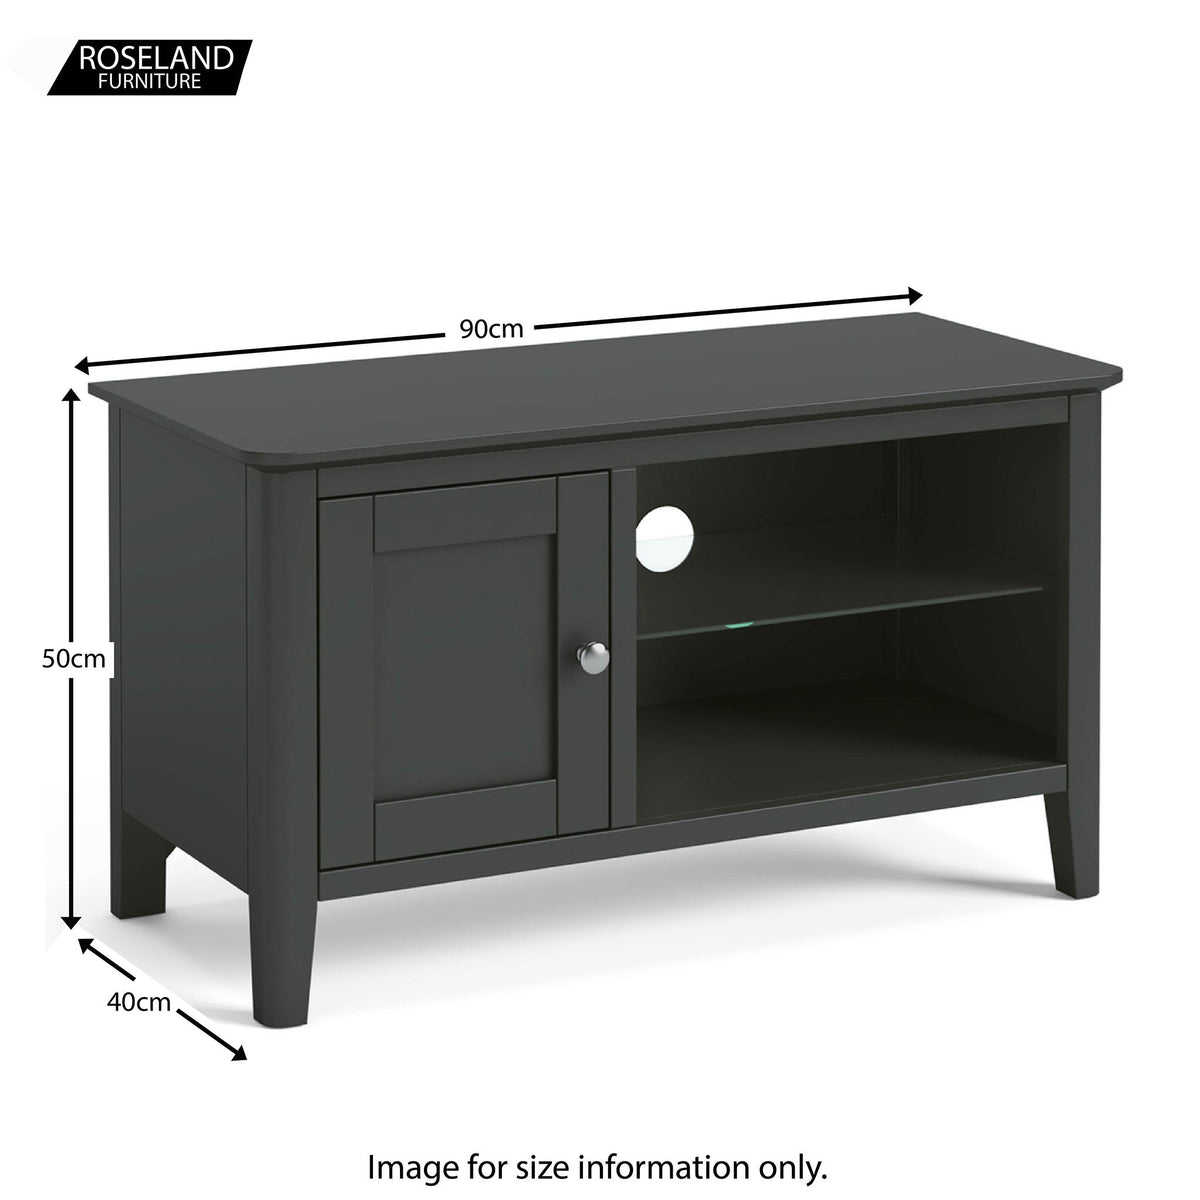 Dumbarton Charcoal Grey 90cm TV Unit Media Stand - Size Guide